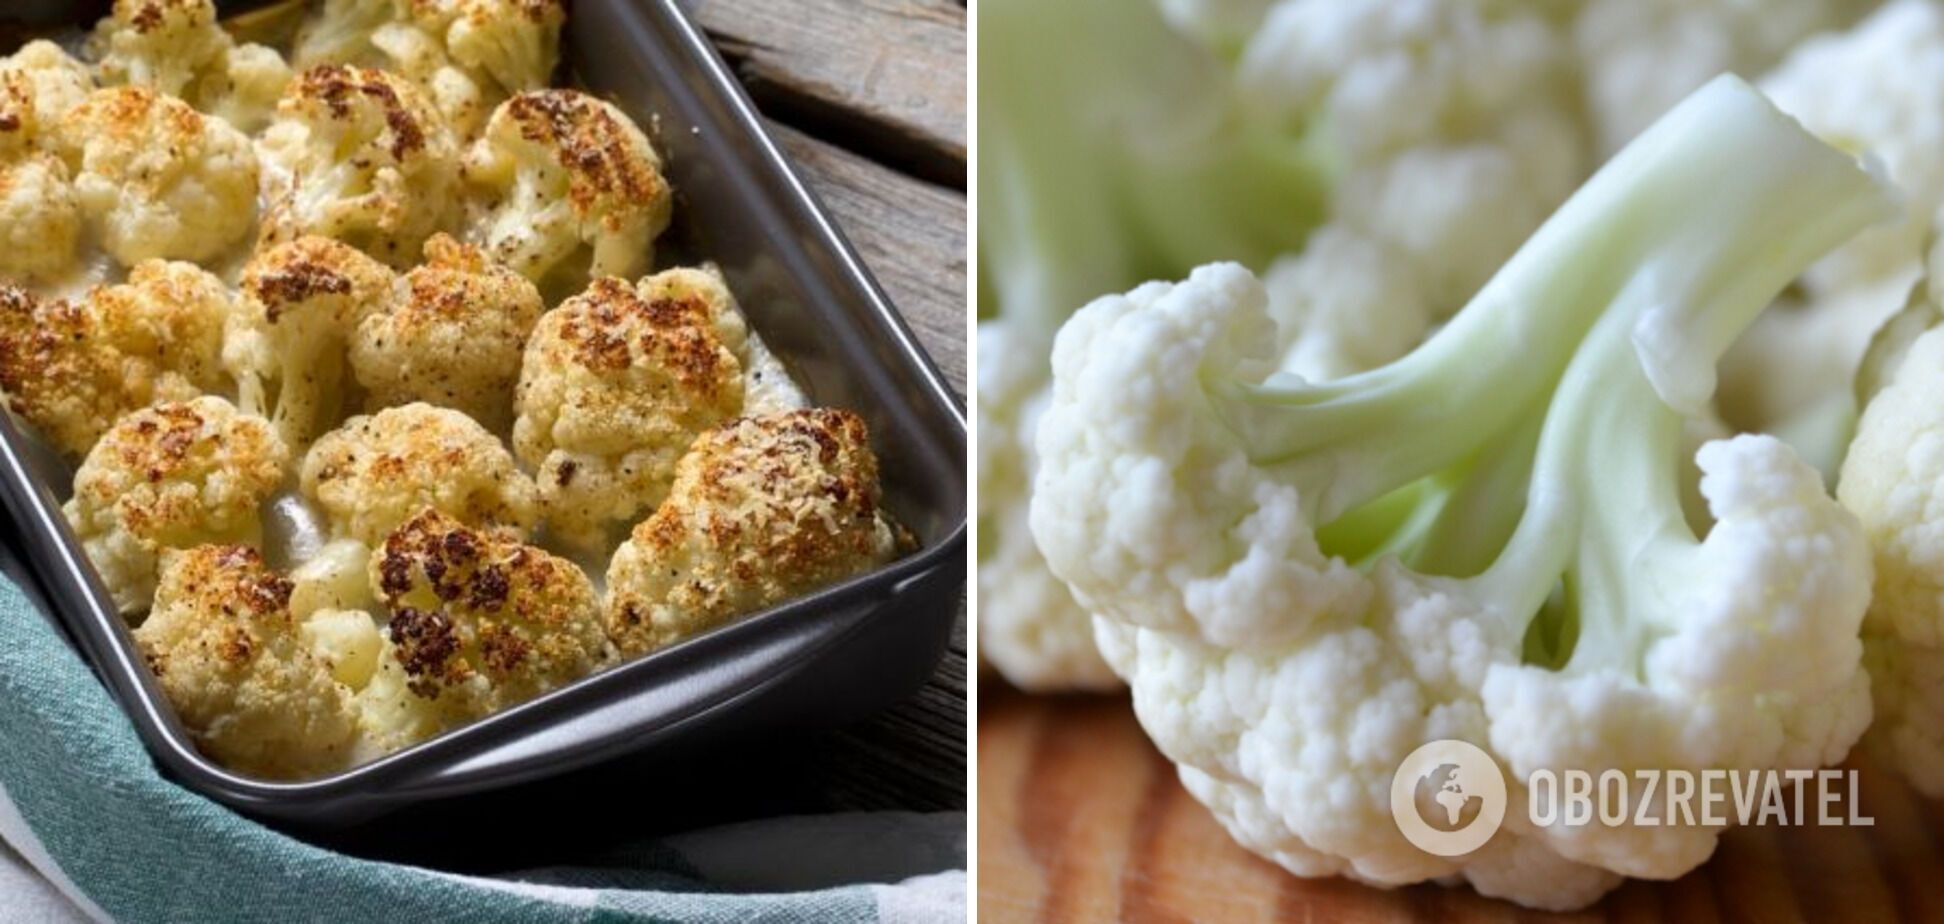 How to cook cauliflower deliciously